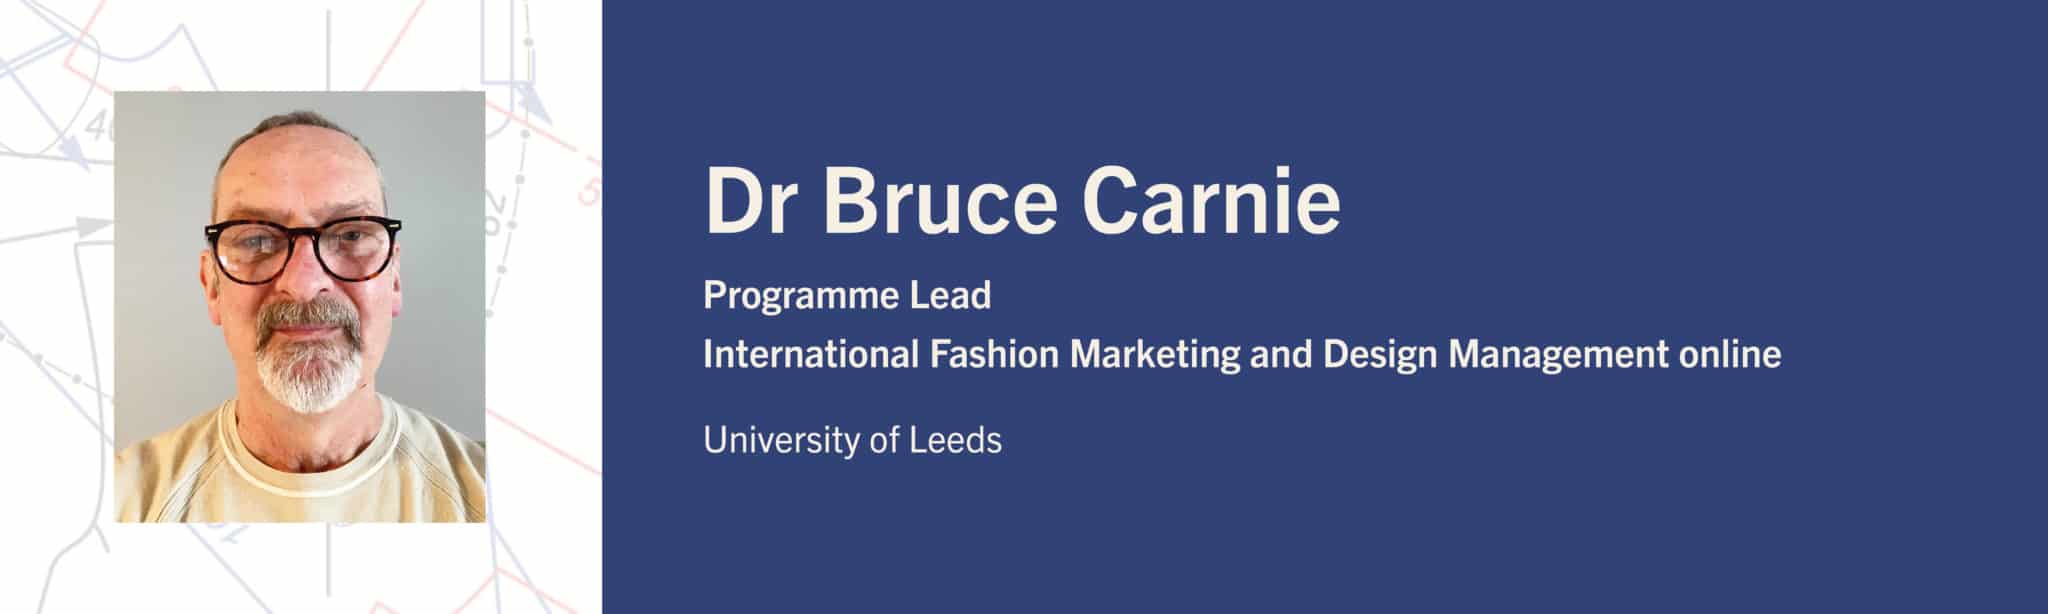 Headshot image of Dr Bruce Carnie, Programme Lead for the online International Fashion Marketing and Design Management MA at the University of Leeds